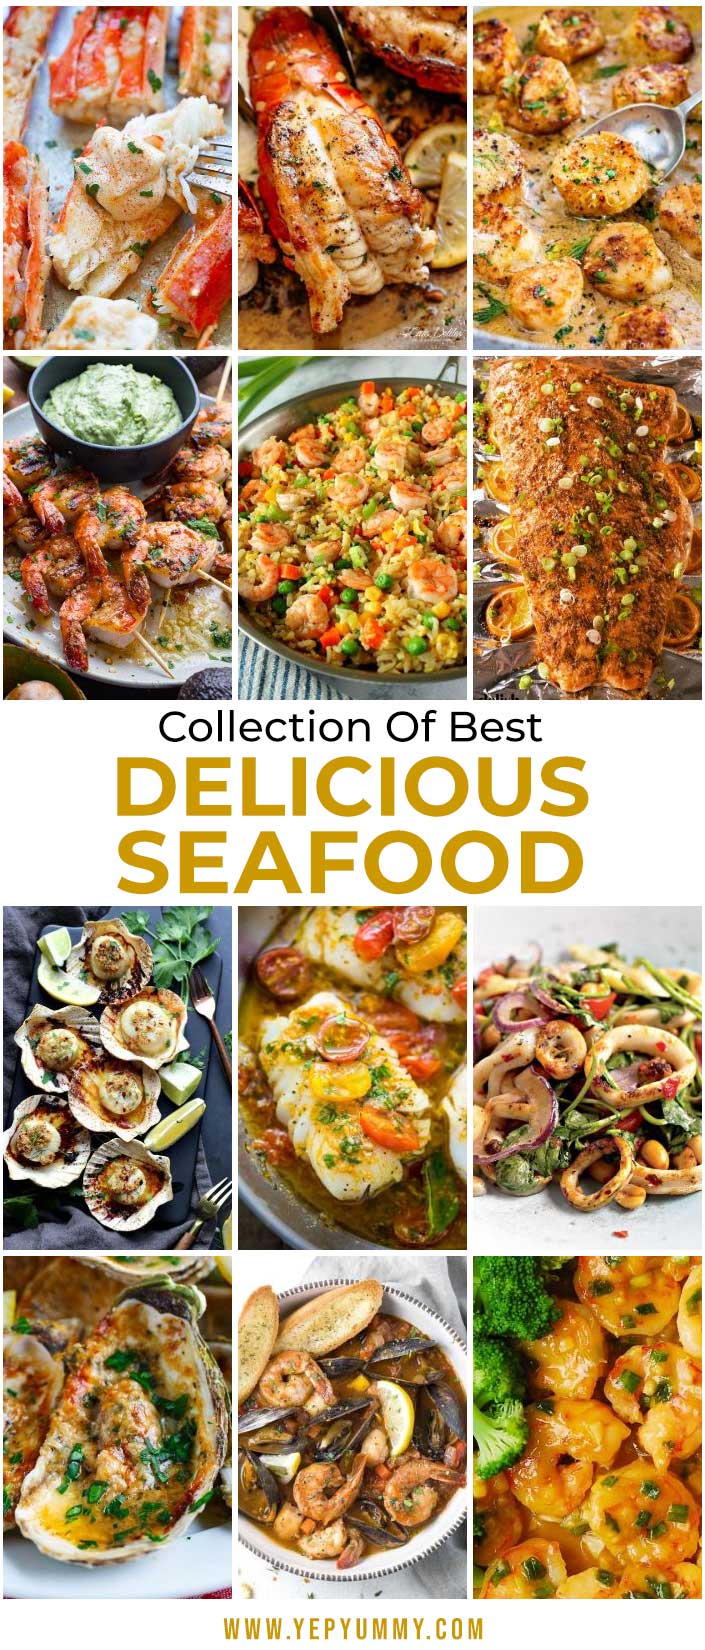 Collection of Best Delicious Seafood Dishes